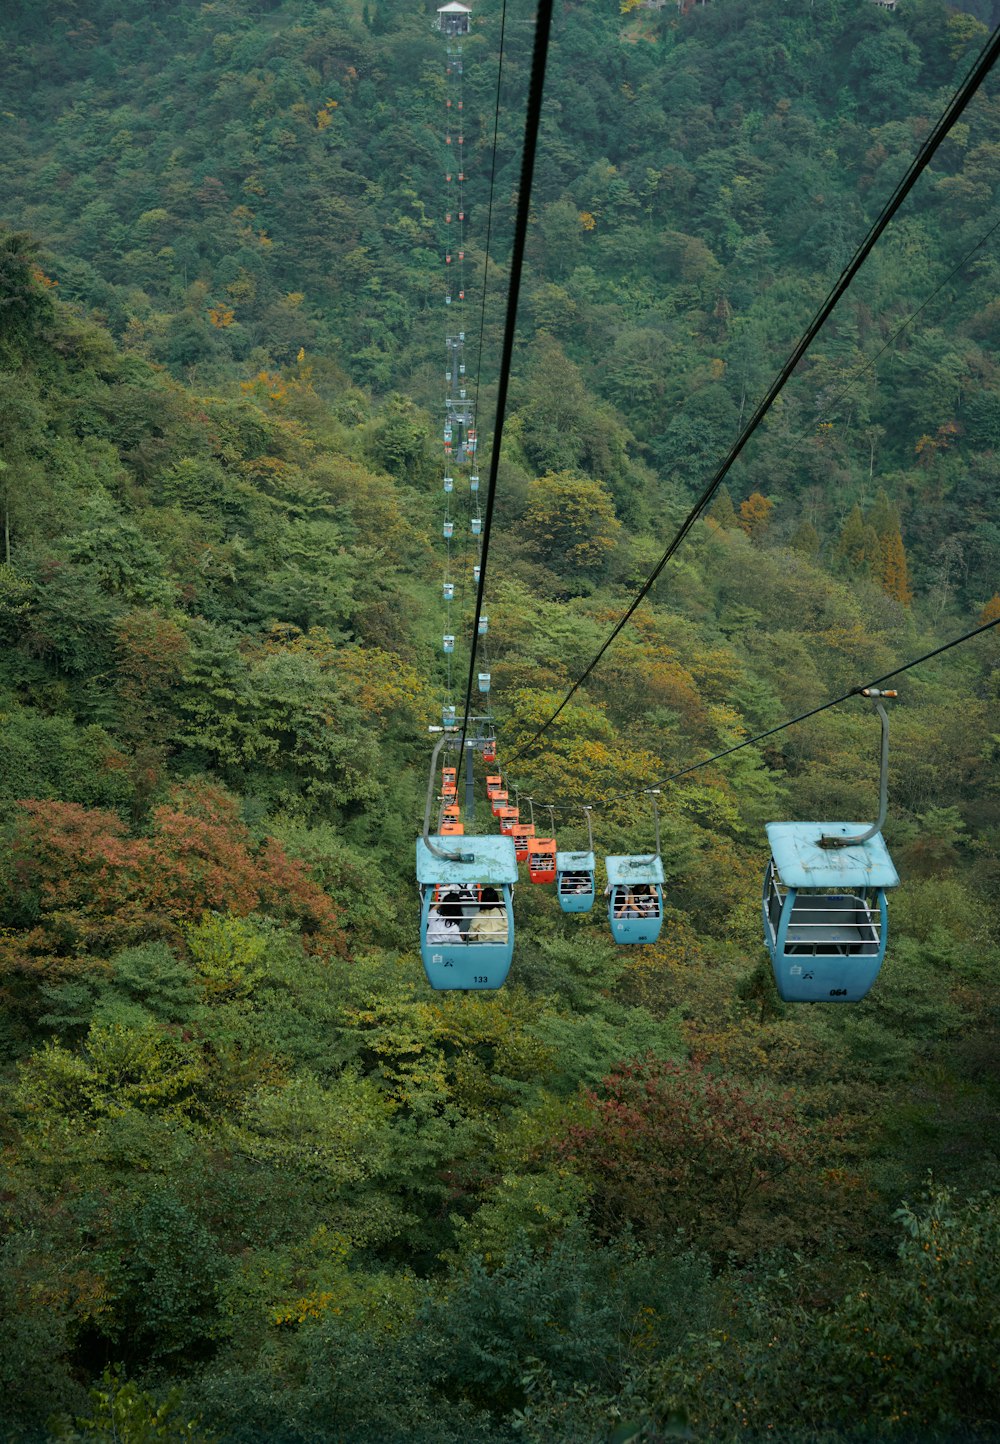 a group of blue and white cable cars on a cable